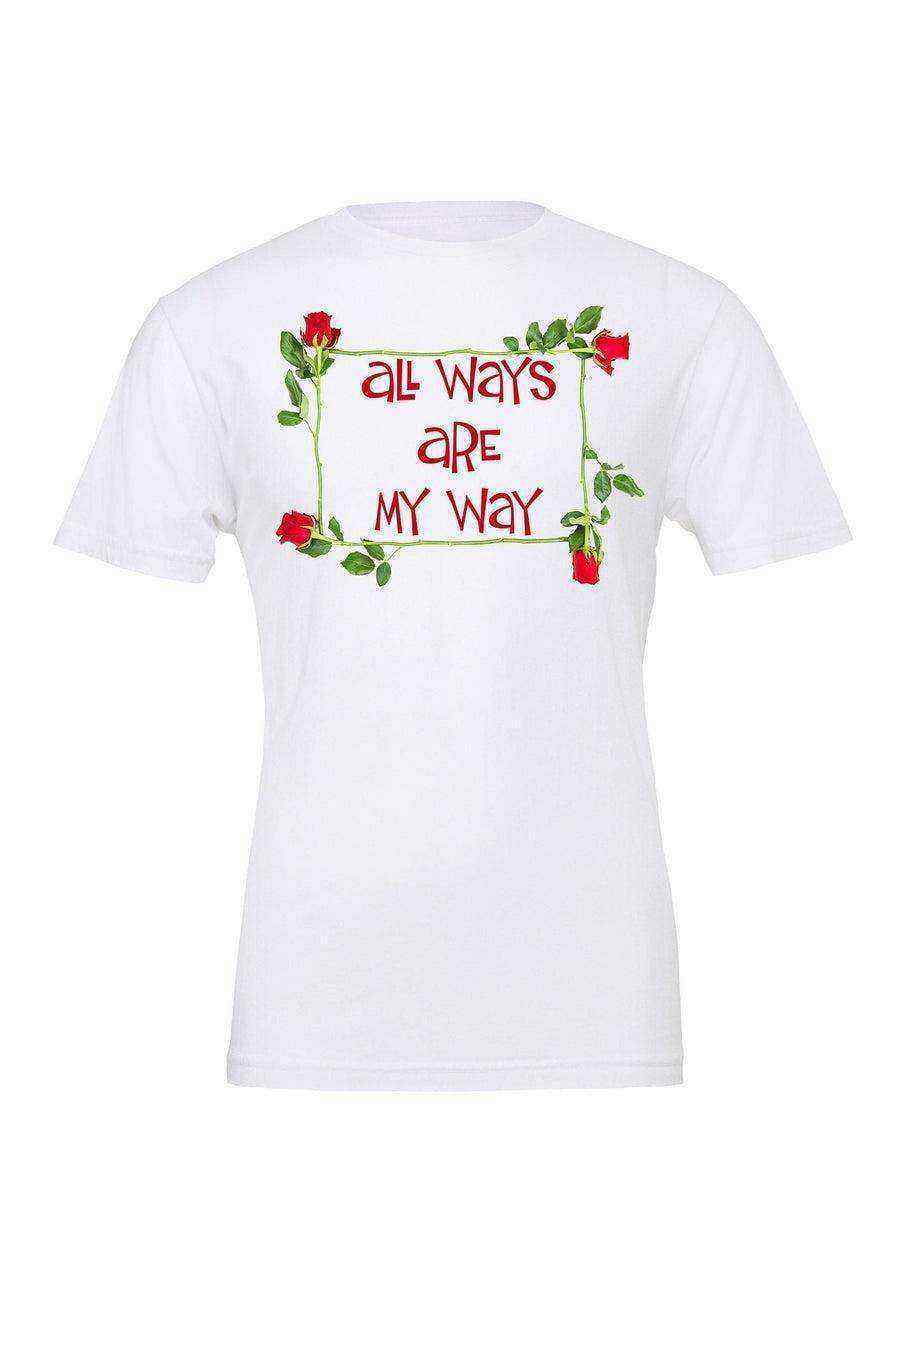 Womens | All Ways Are My Way Shirt | Queen Of Hearts Shirt - Dylan's Tees